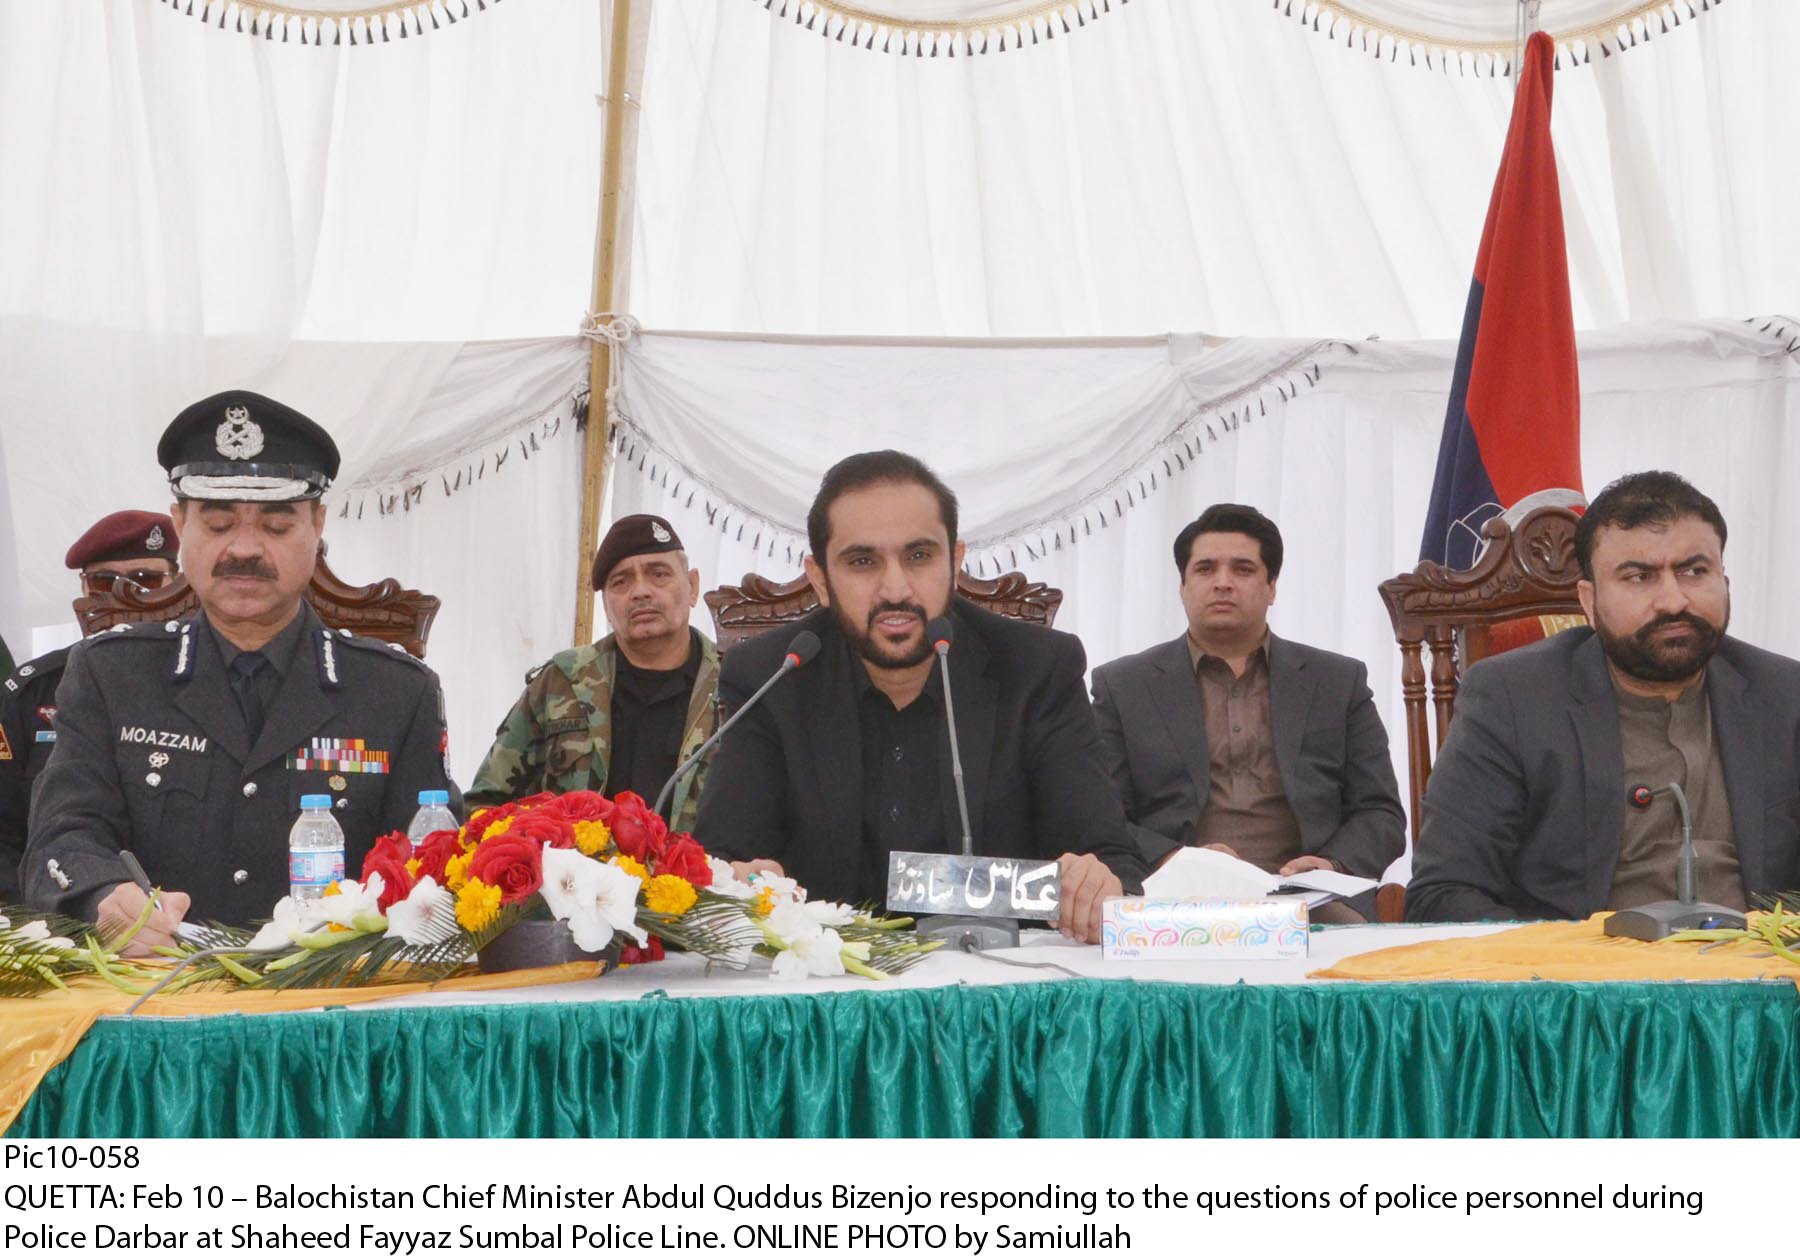 balochistan chief minister responding to questions of police personnel photo online